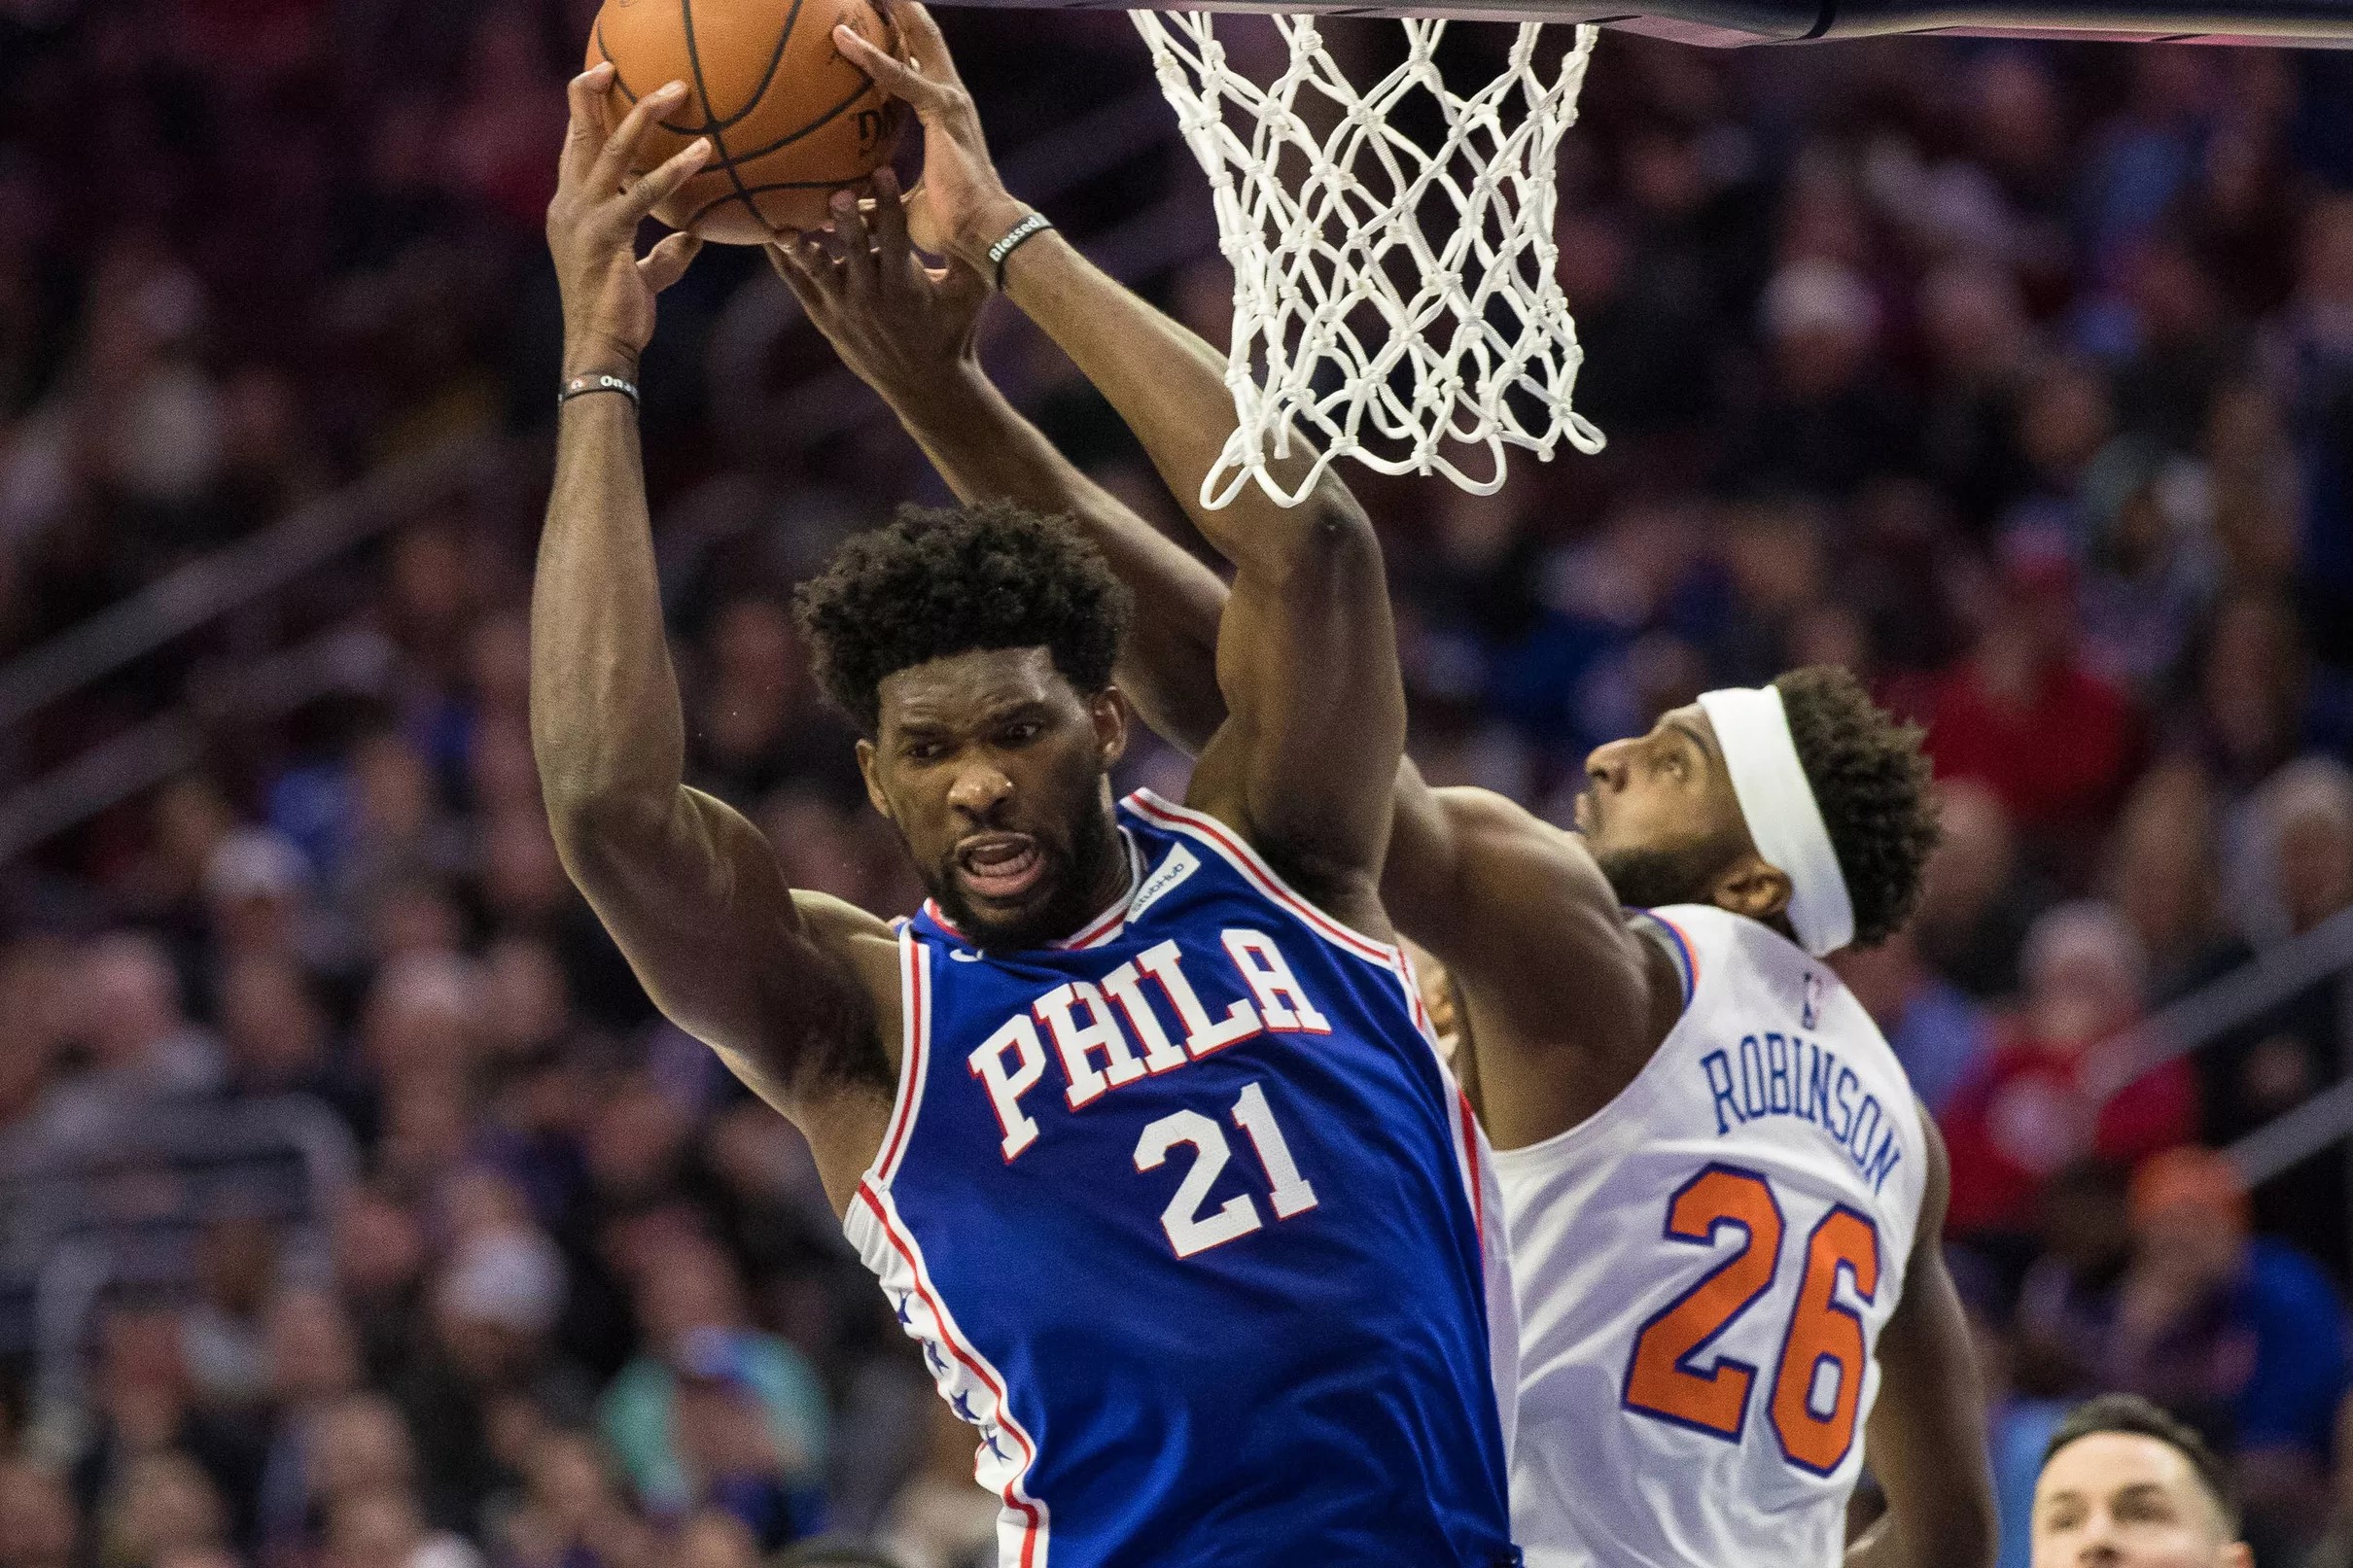 Sixers vs. Knicks Preview and Game Info